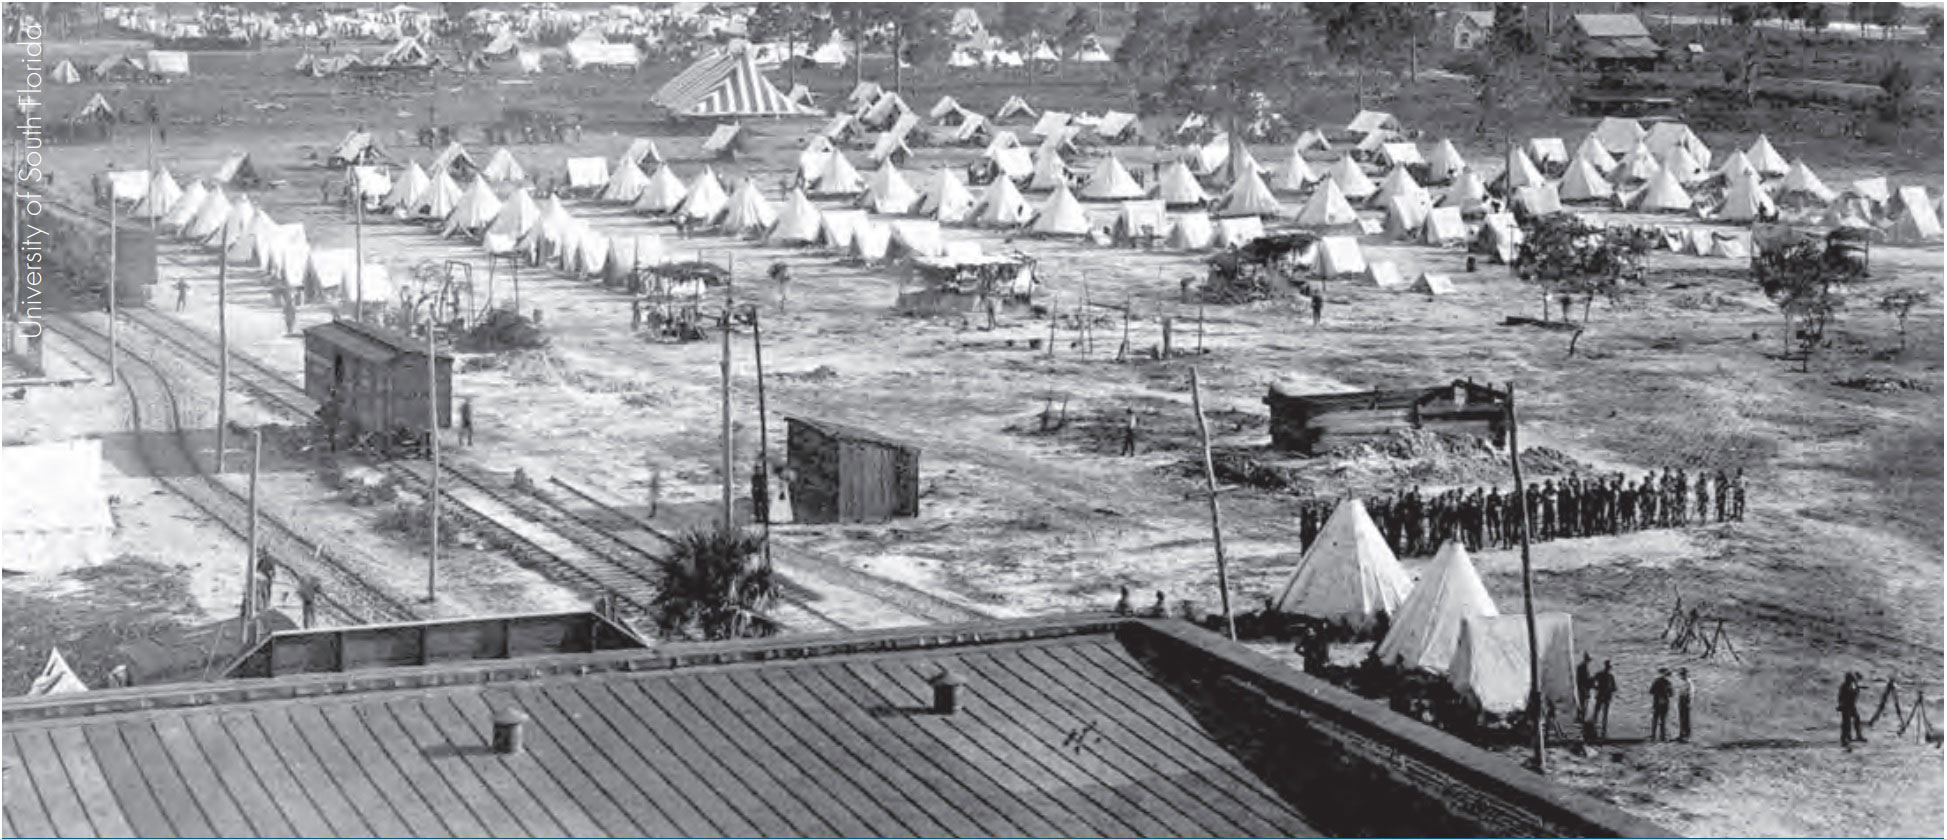  Aerial view of military encampment near Tampa, c. 1898